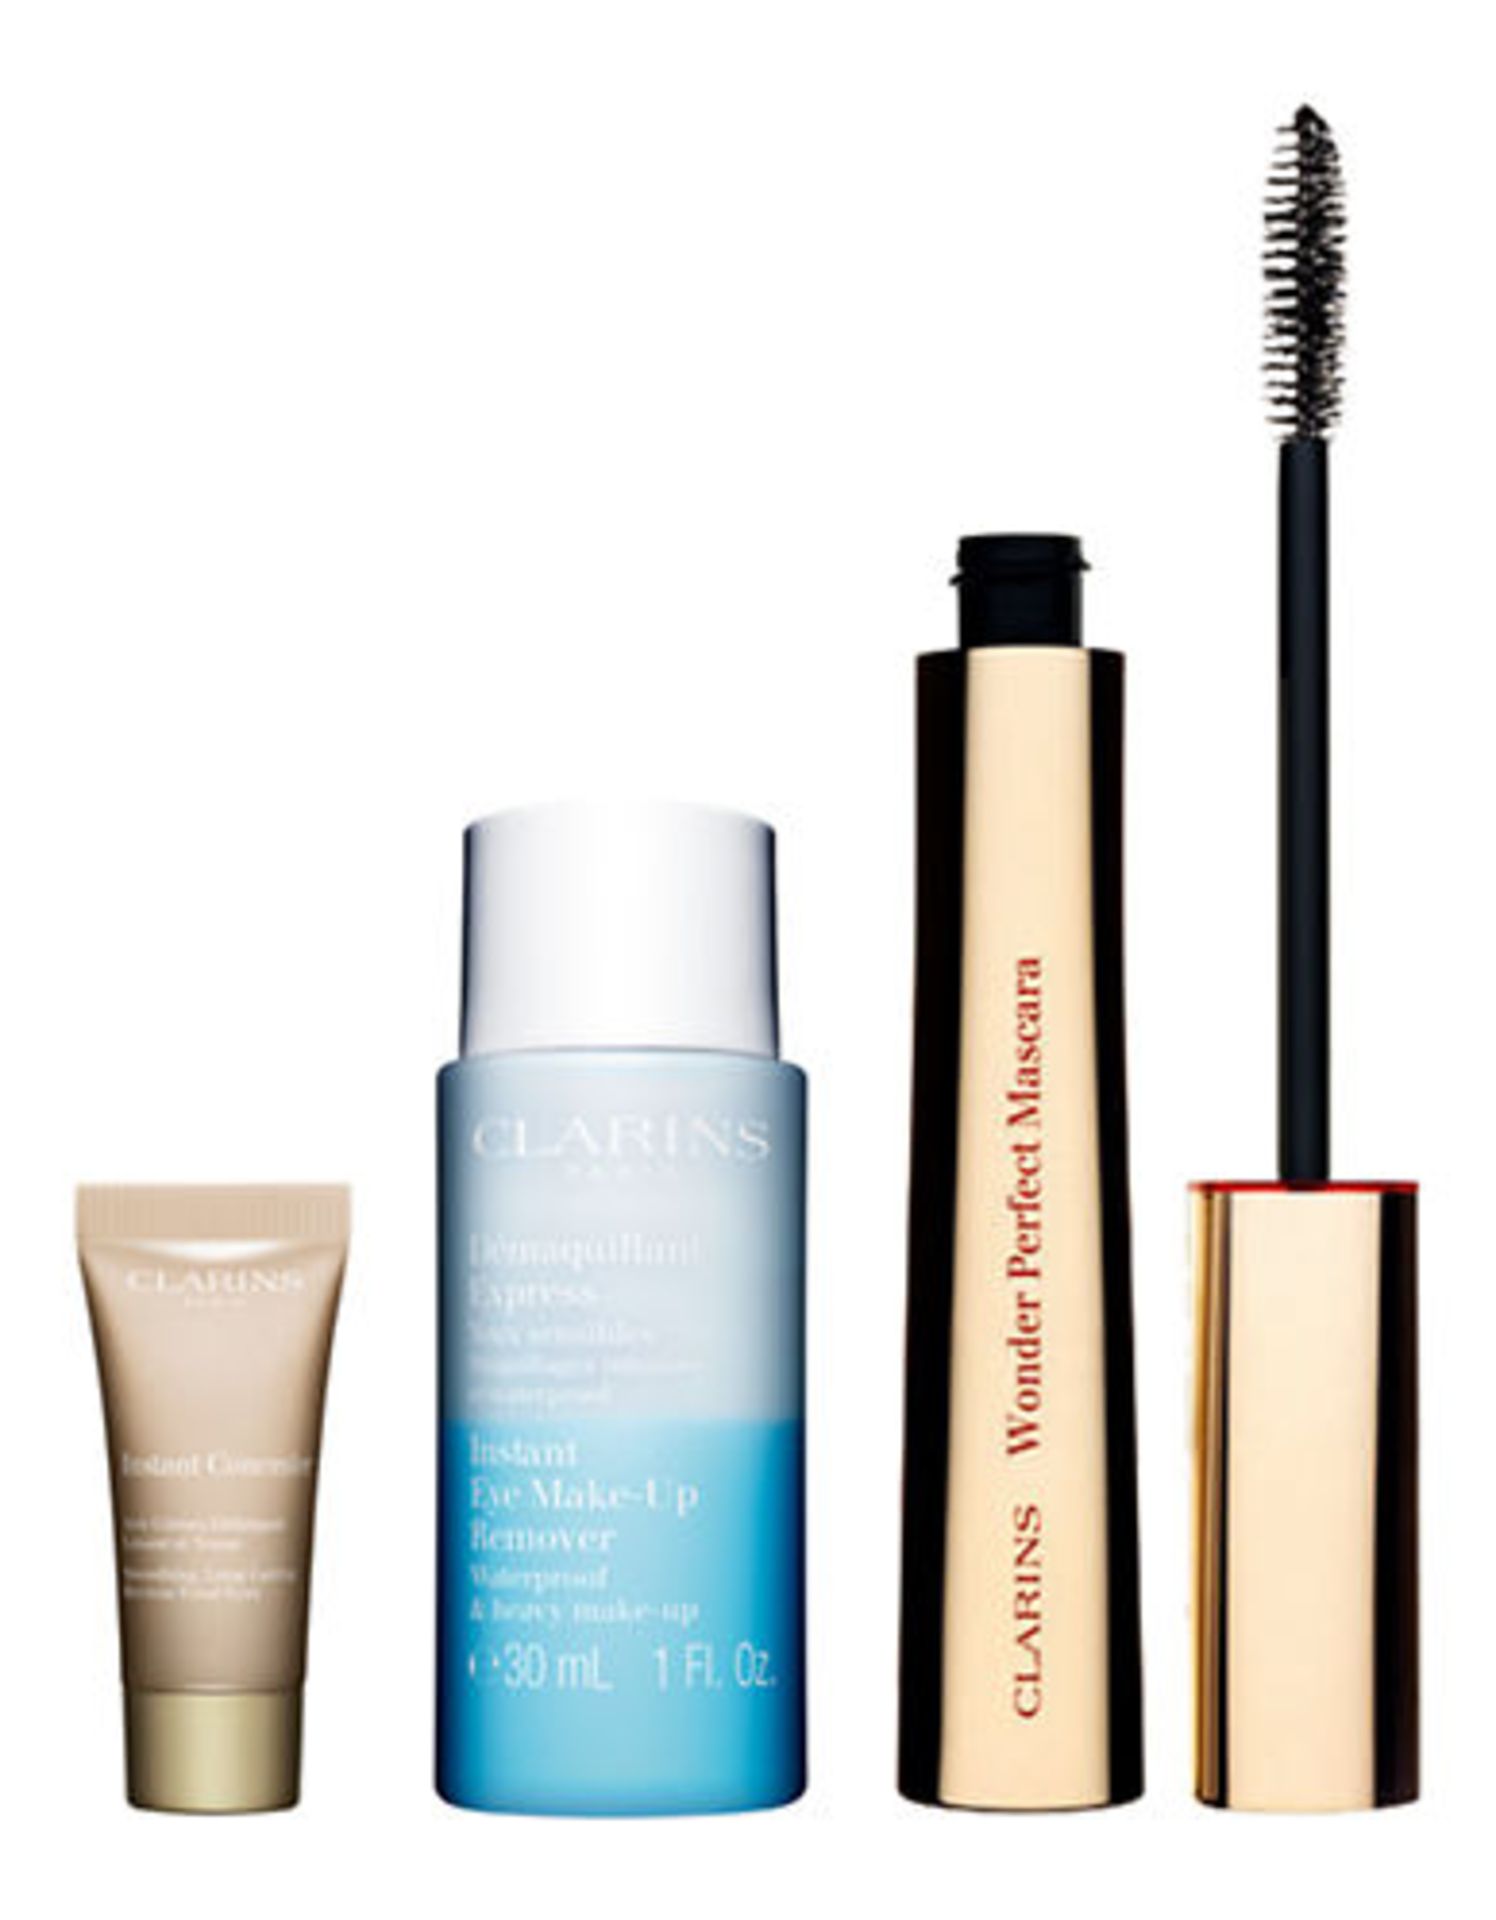 V Brand New Clarins Wonder Perfect Mascara Set Icludes Eye Make-Up Remover and Instant Concealer